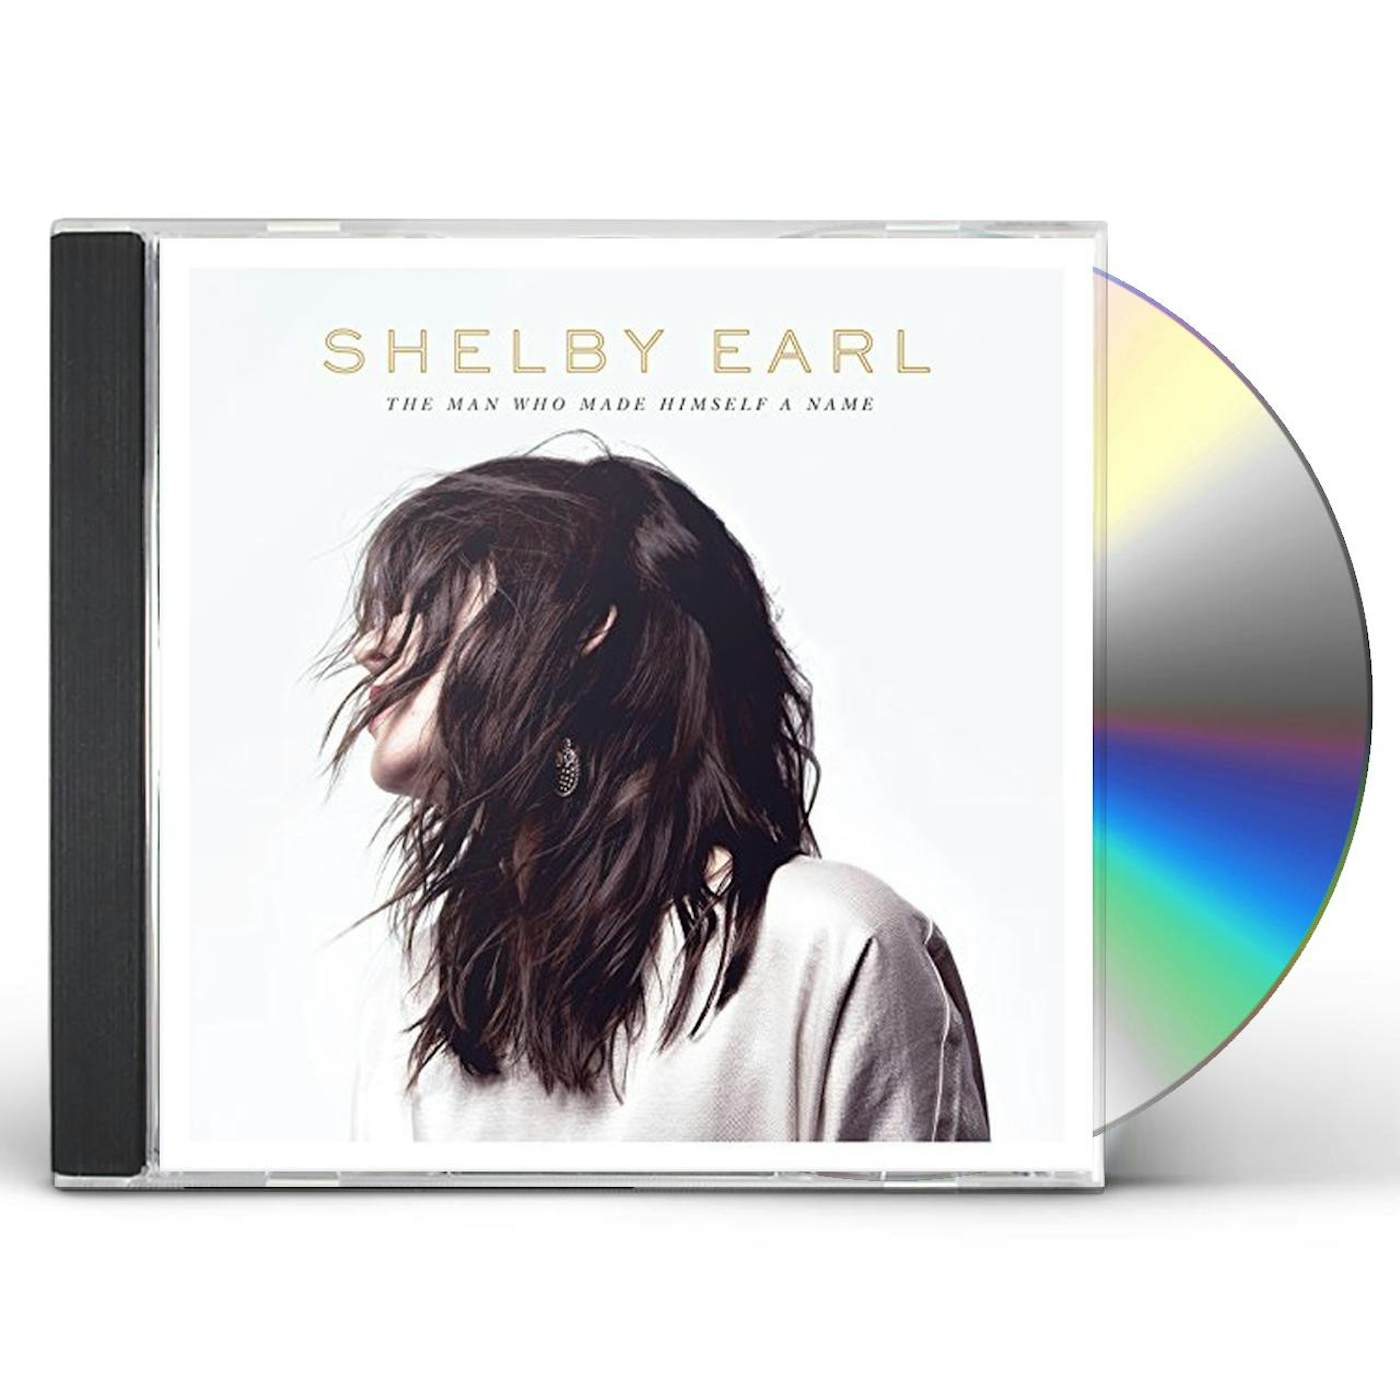 Shelby Earl MAN WHO MADE HIMSELF A NAME CD